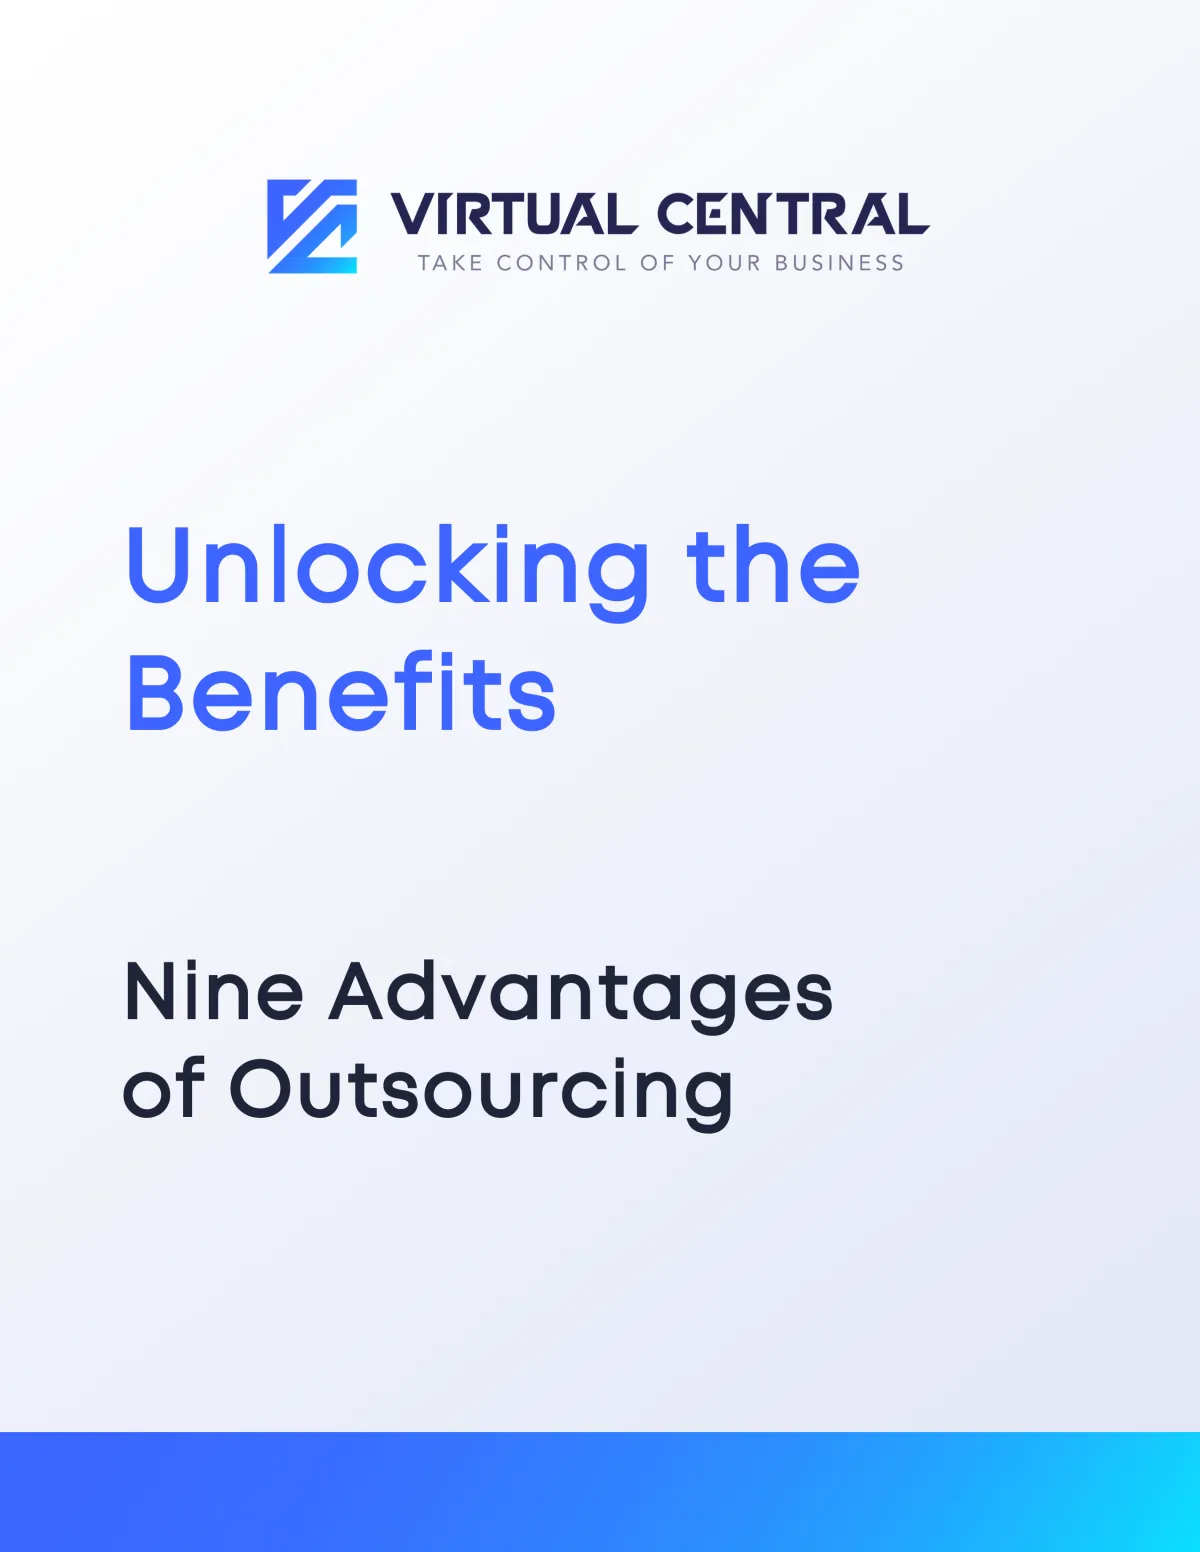 Nine Advantages of Outsourcing - Virtual Central